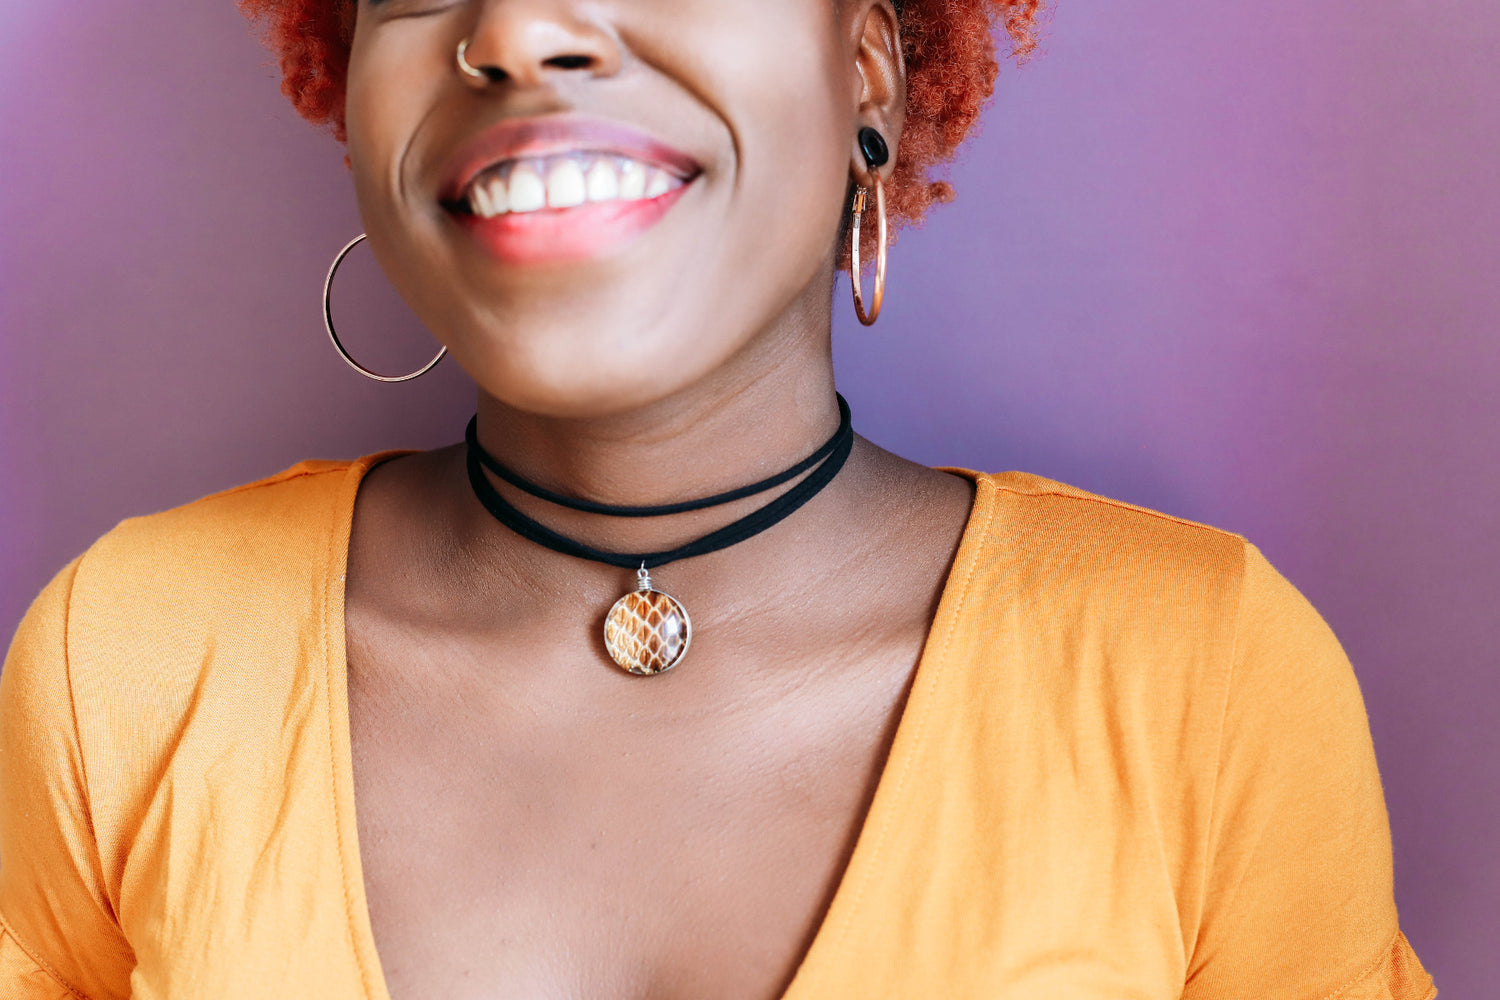 Smiling black girl with red hair wearing a black leather choker necklace with a snake skin glass pendant and orange shirt on a purple background 